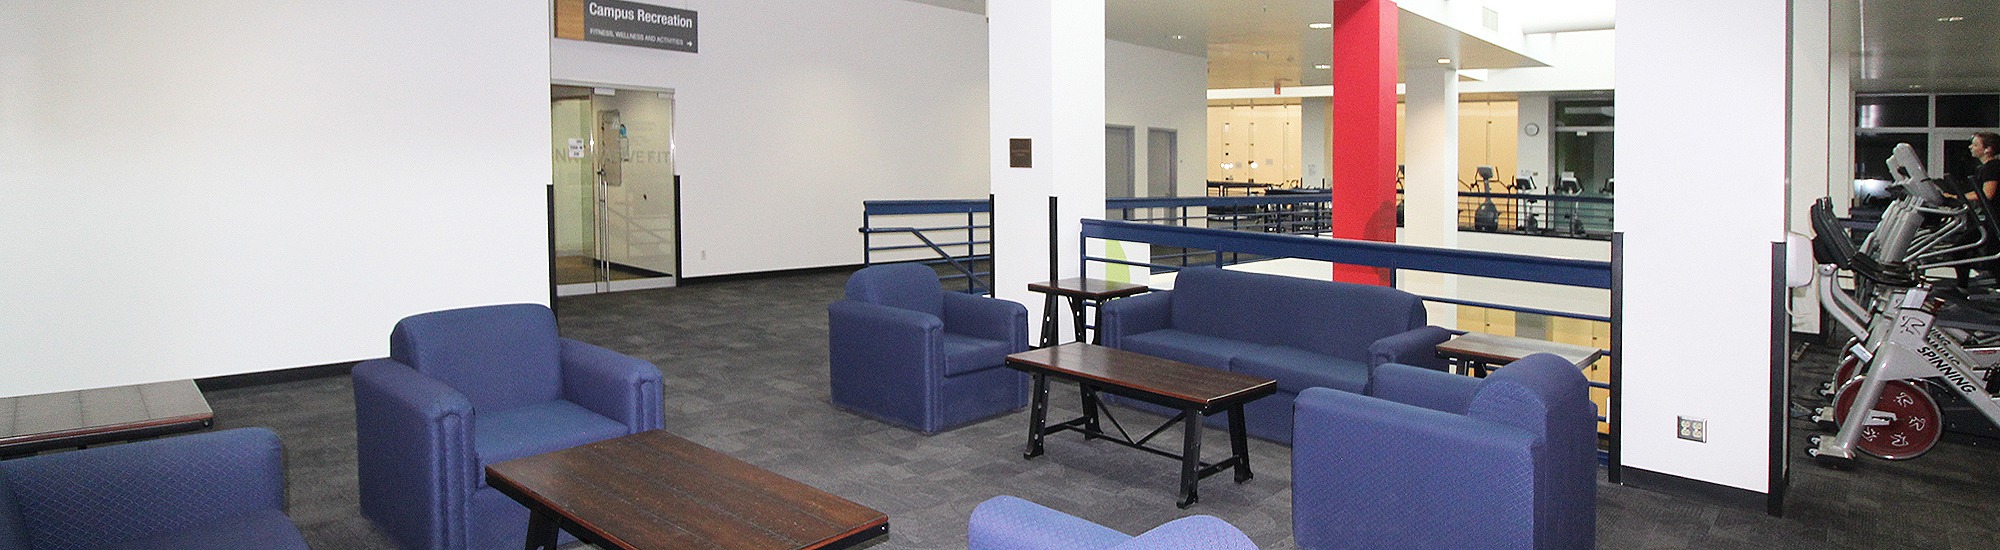 Lounge space with armchairs and tables at Campus Rec UArizona